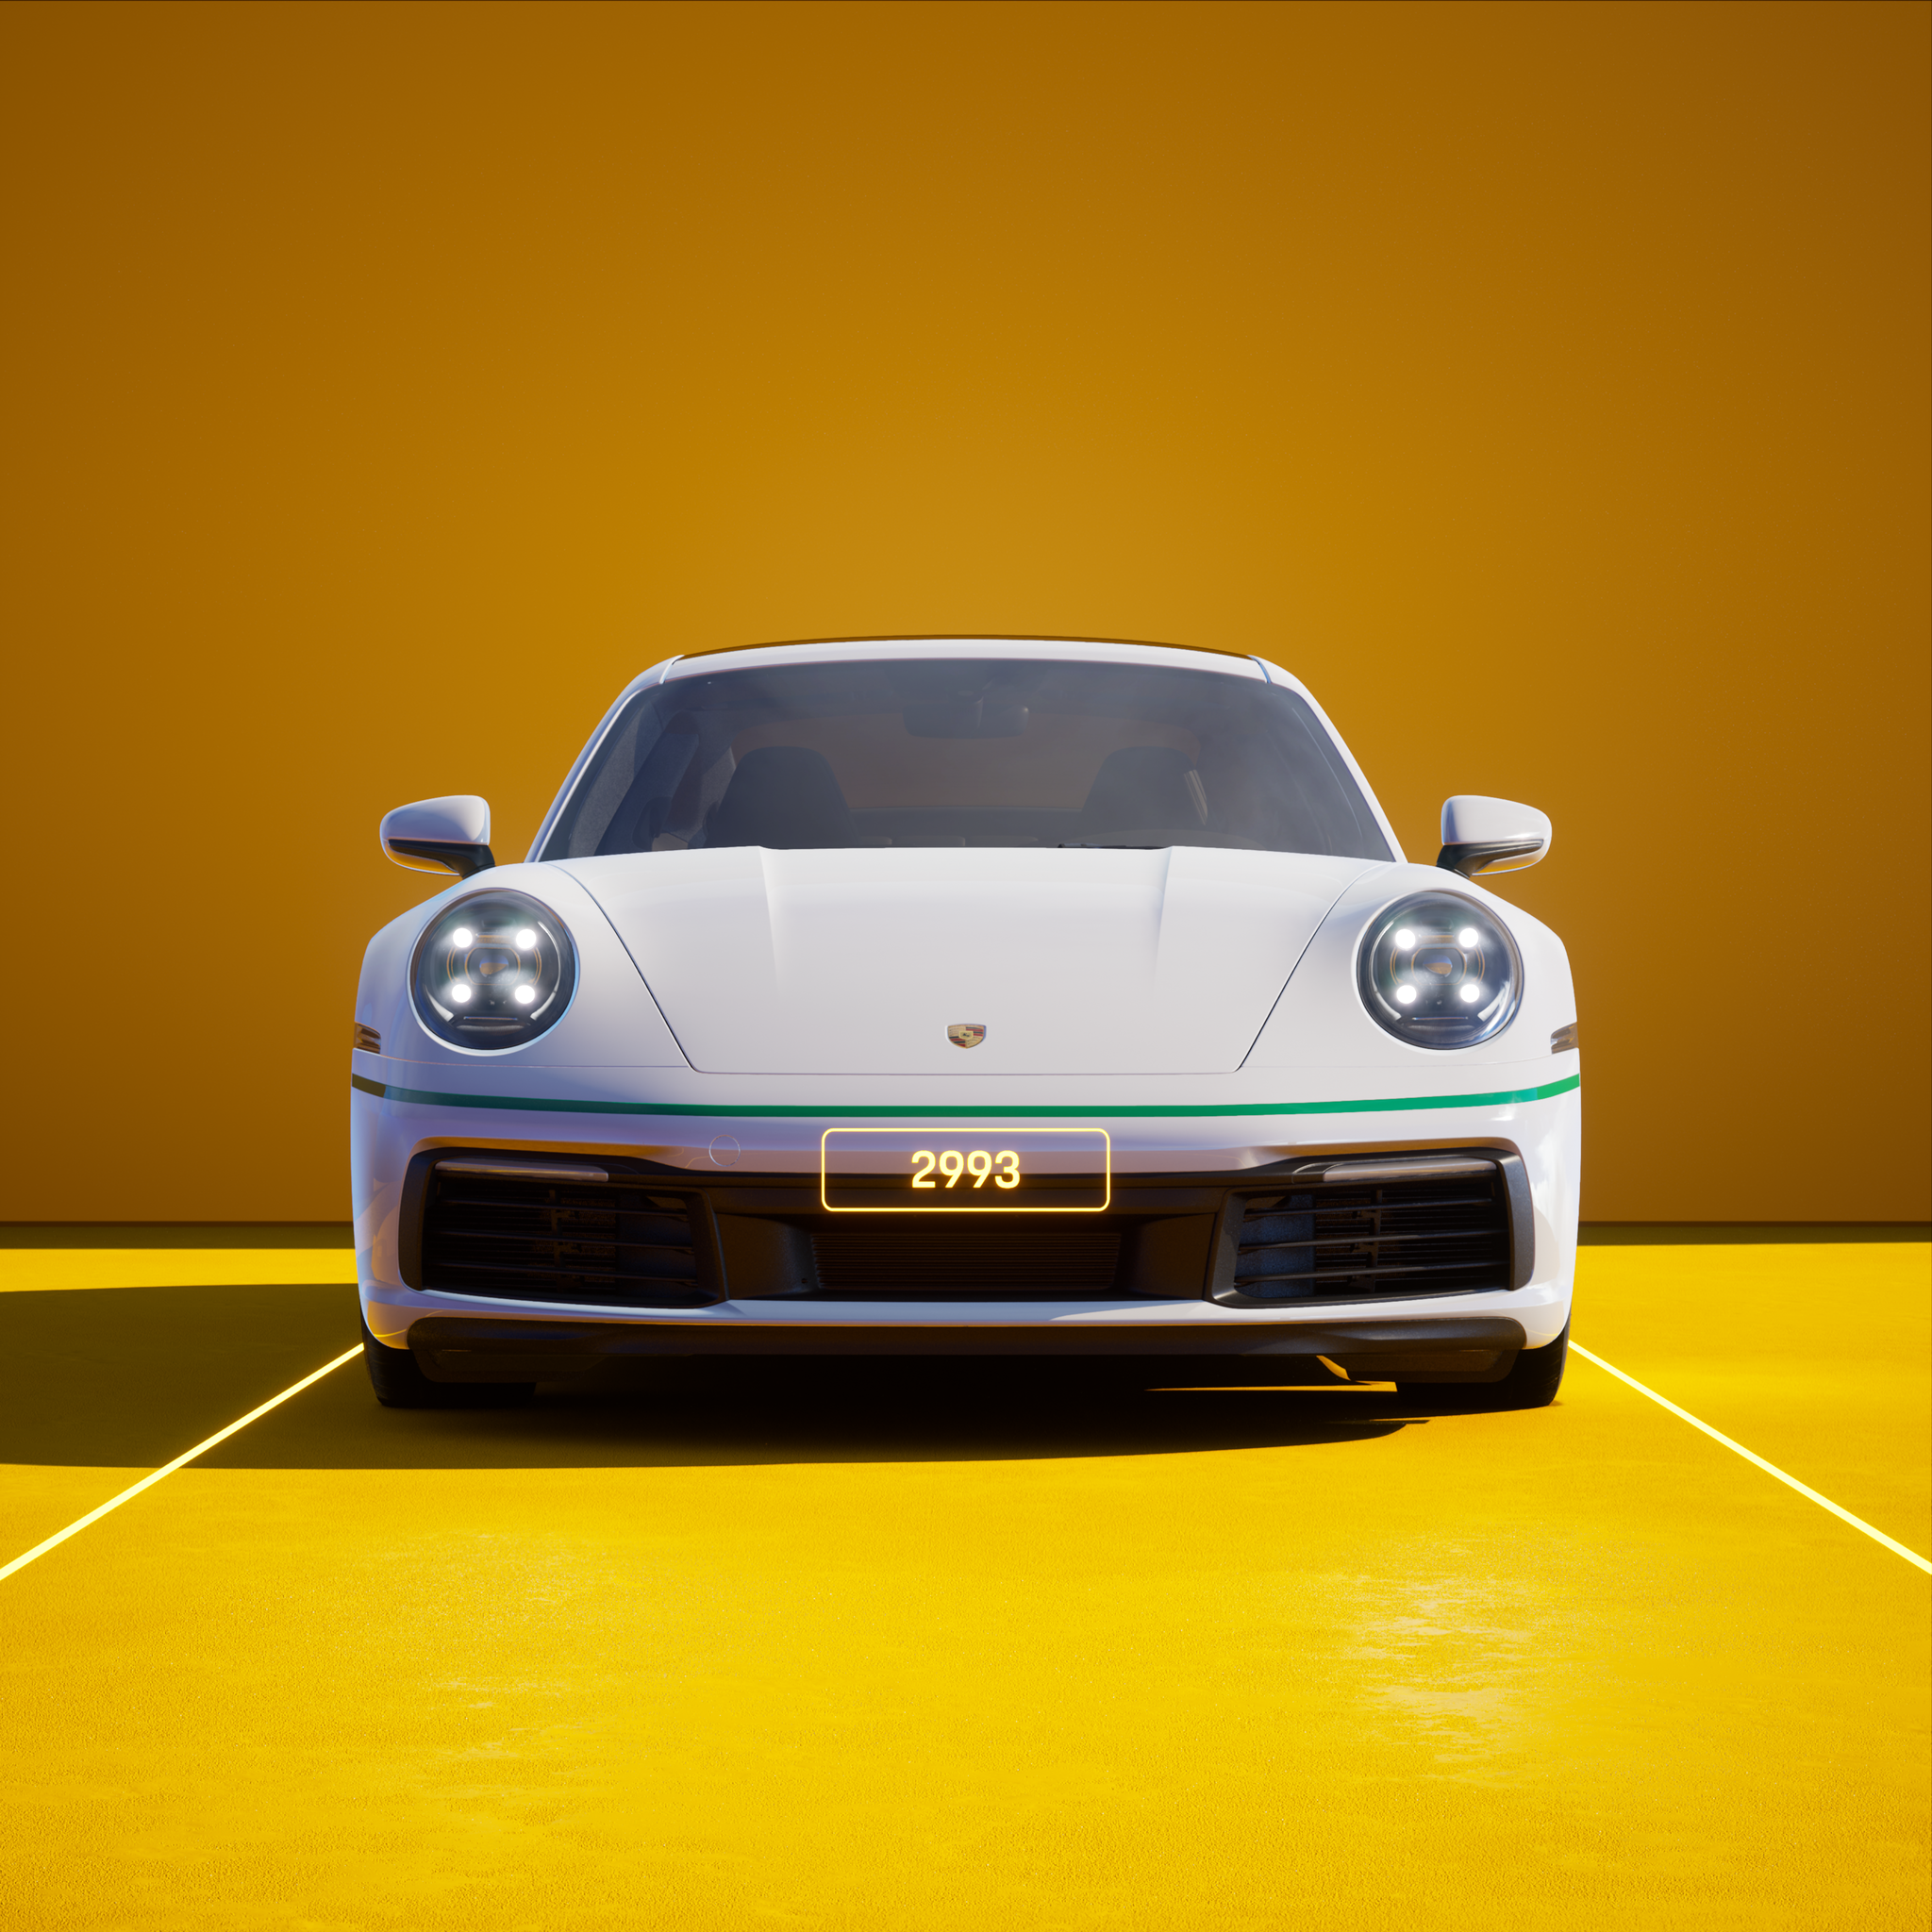 The PORSCHΞ 911 2993 image in phase